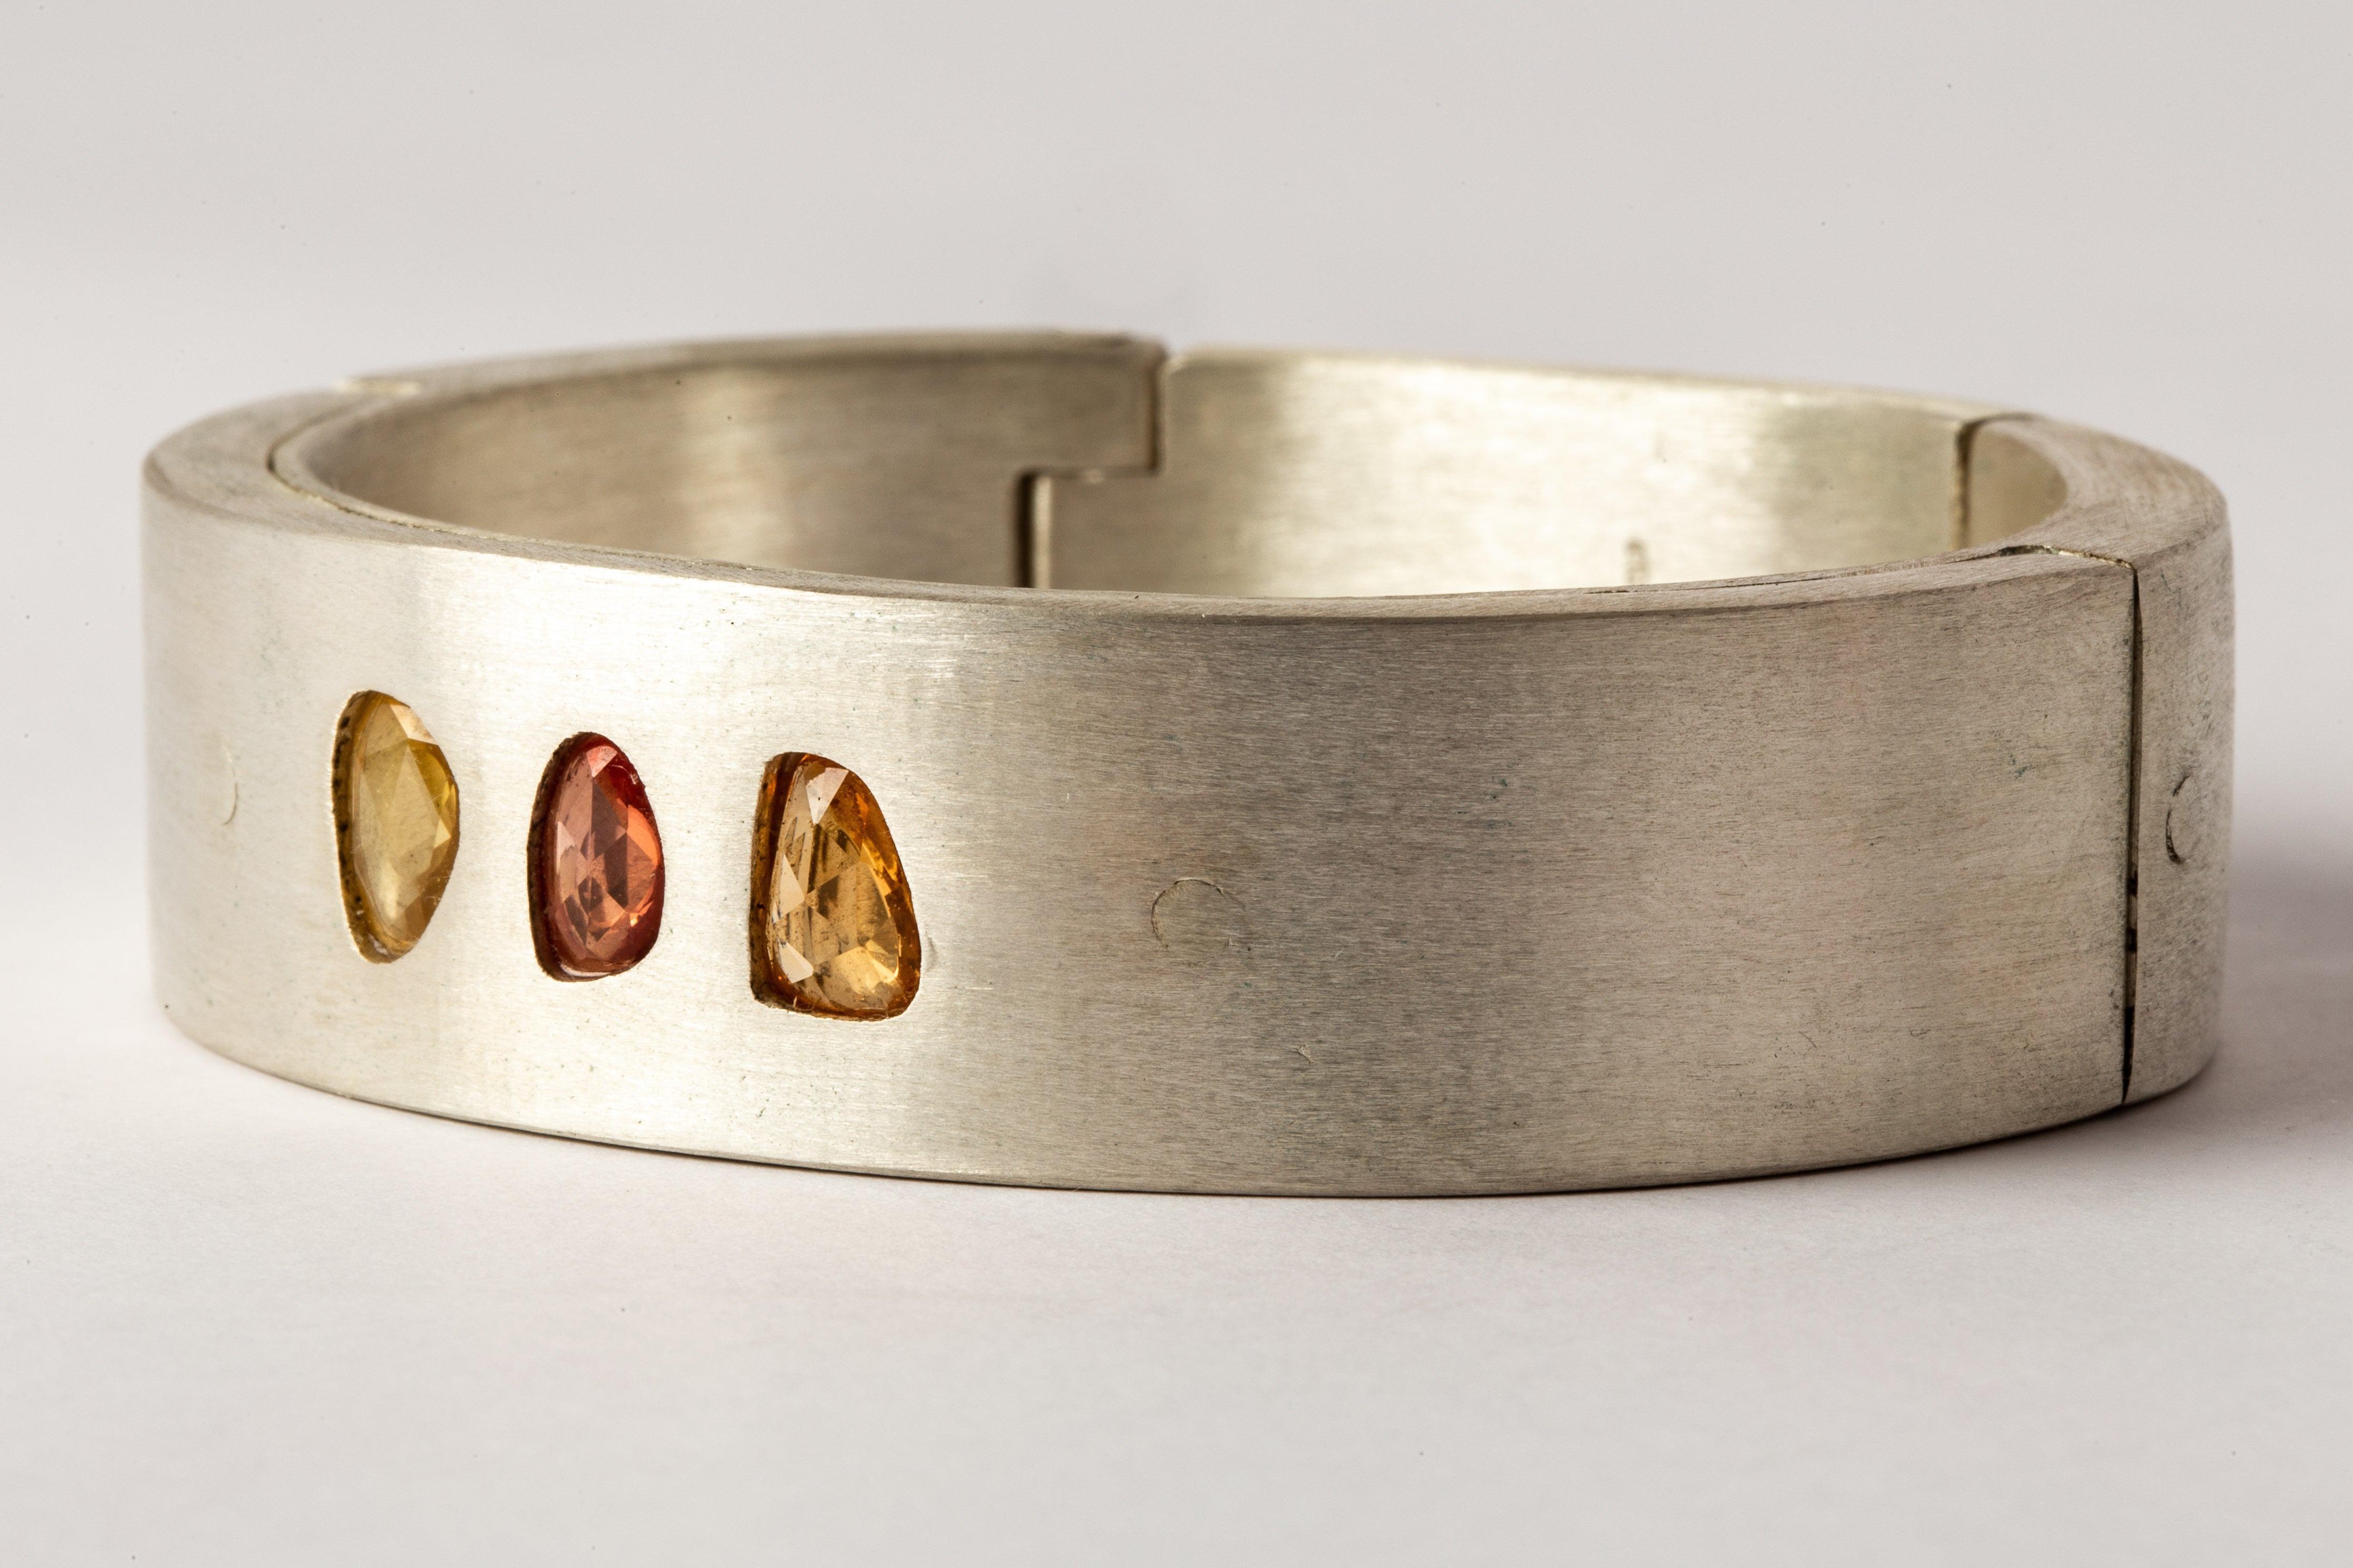 Sistema bracelet in sterling silver and slabs of rough sapphire (faceted). The 